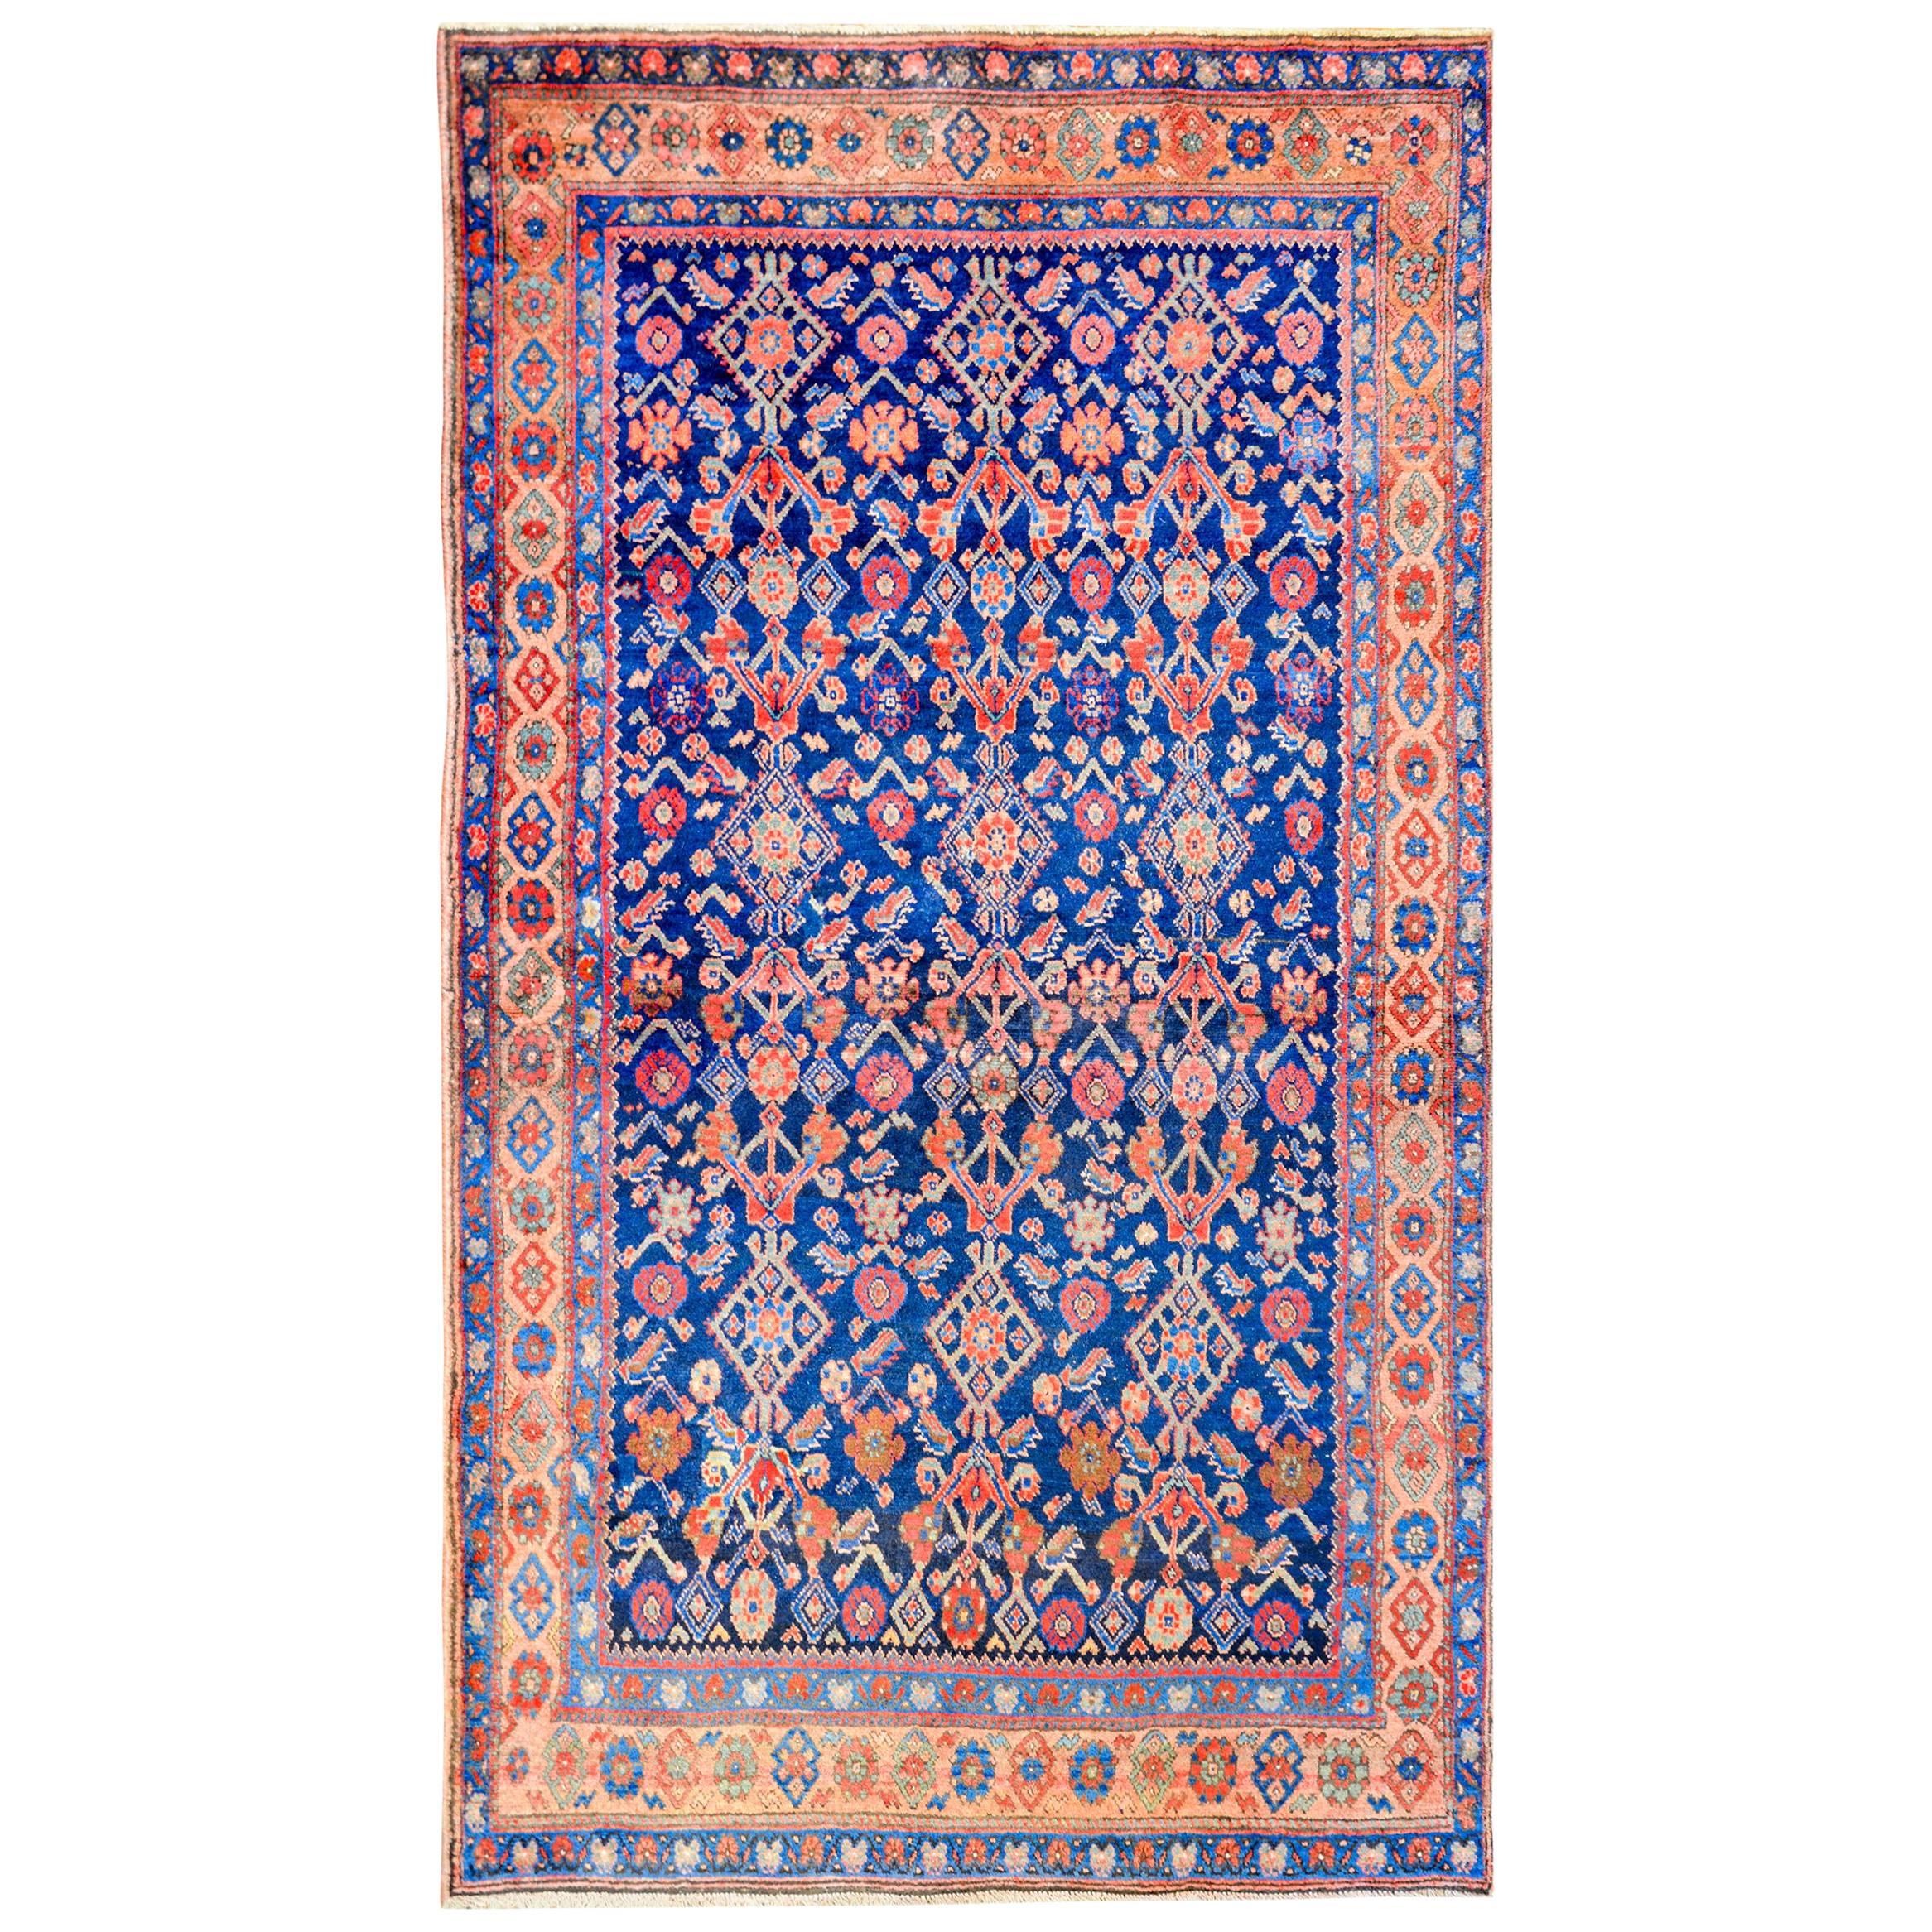 Exceptional Early 20th Century Bidjar Rug For Sale